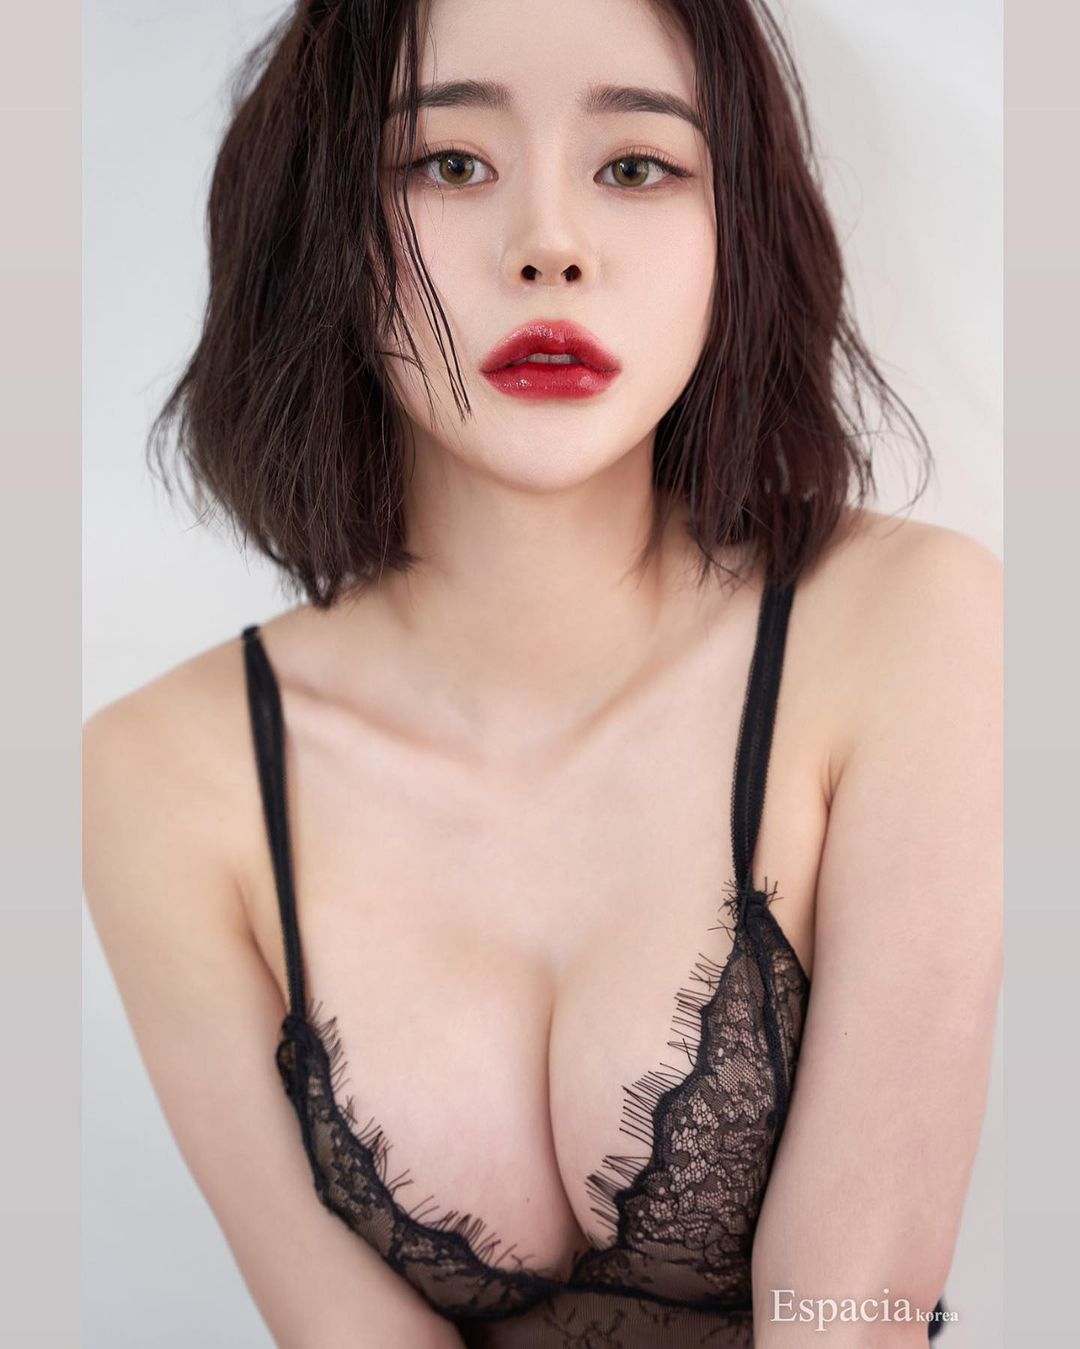 Rahee, the influencer who acts sexy on YouTube